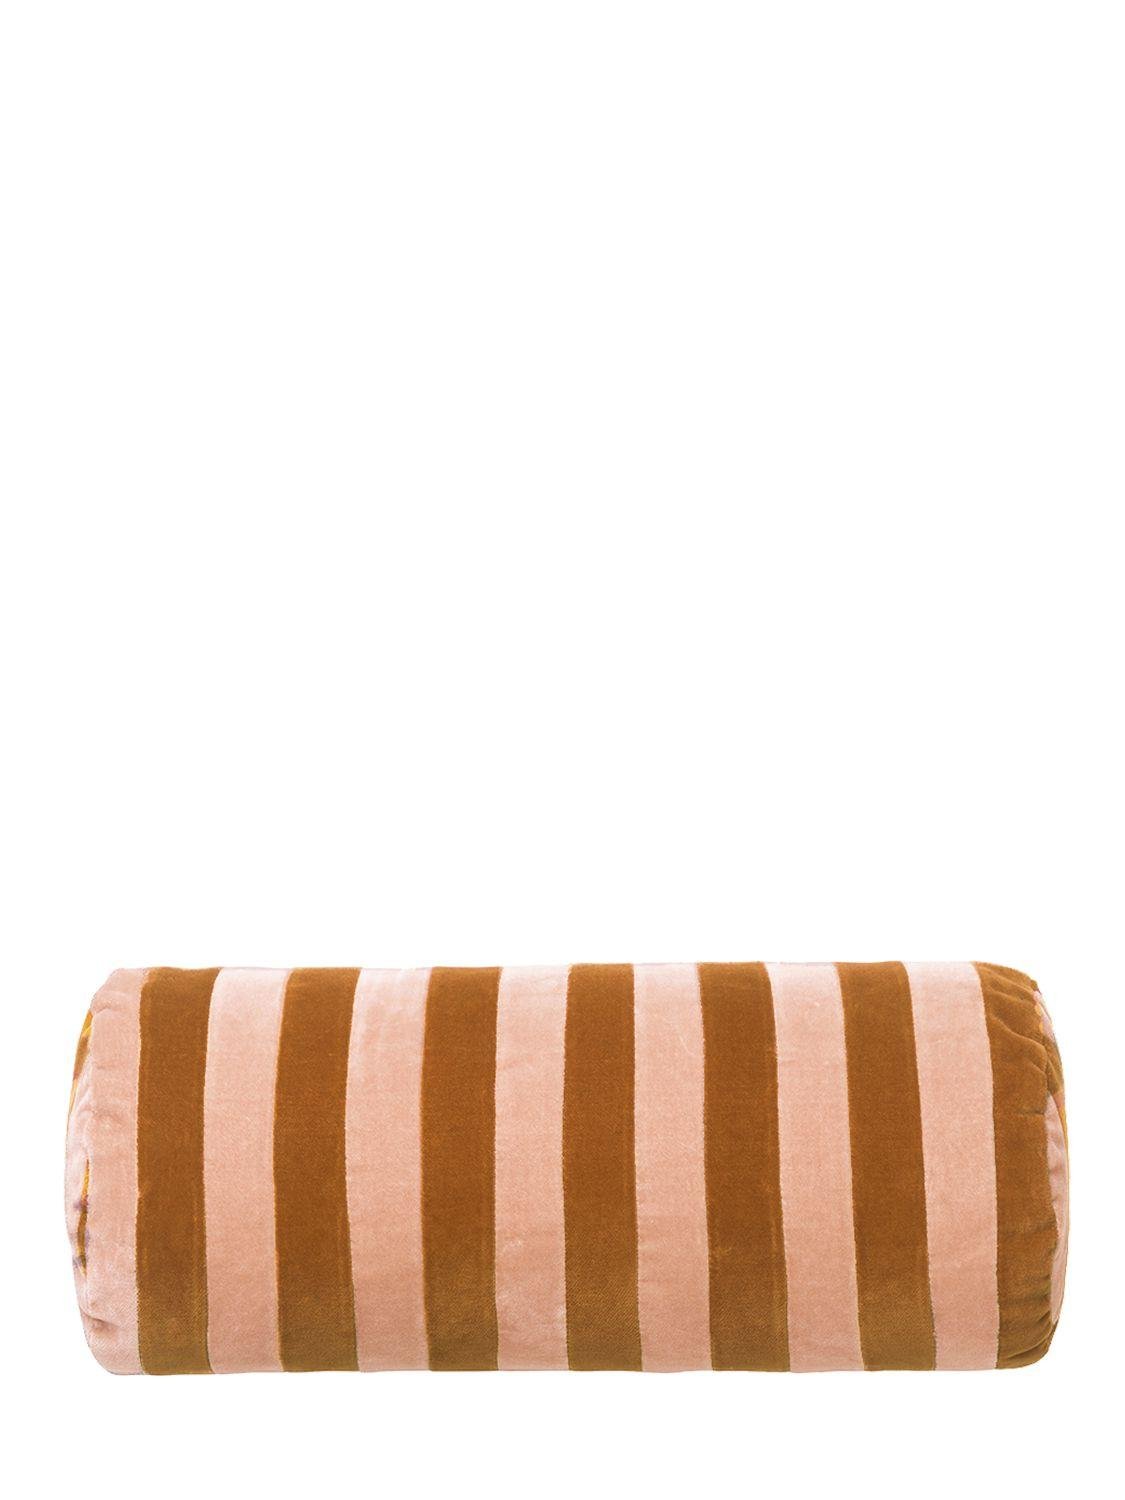 Striped Bolster by CHRISTINA LUNDSTEEN